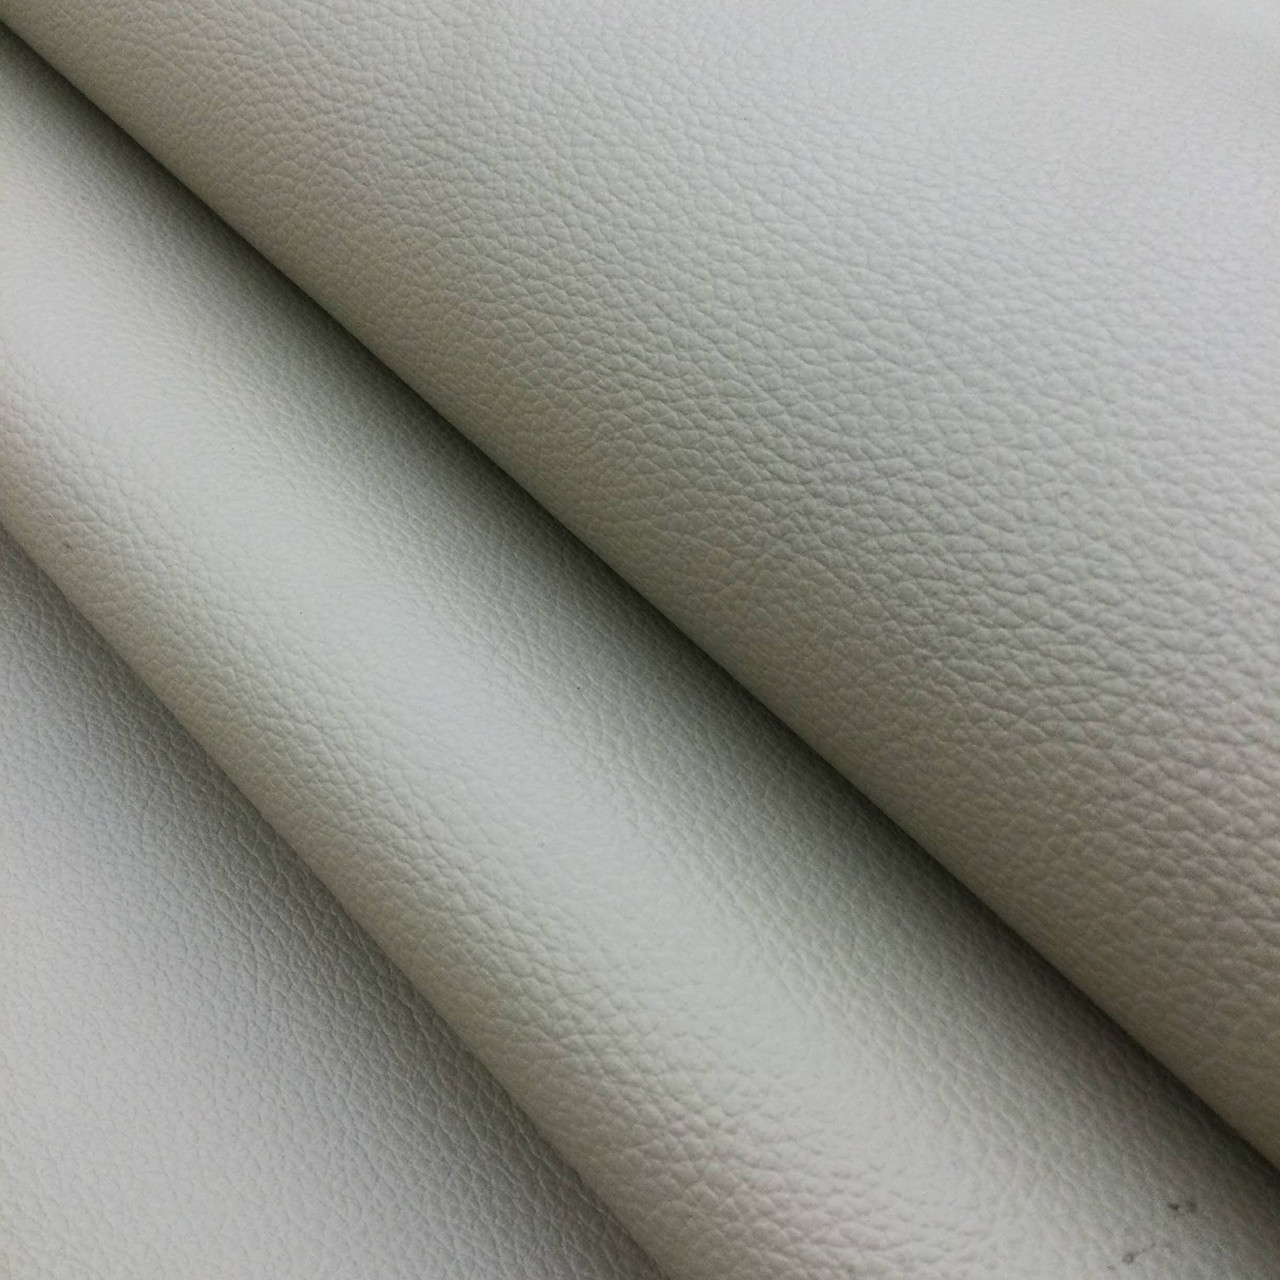 Stiff Thick Faux Leather Sheets - WINIW Microfiber Leather